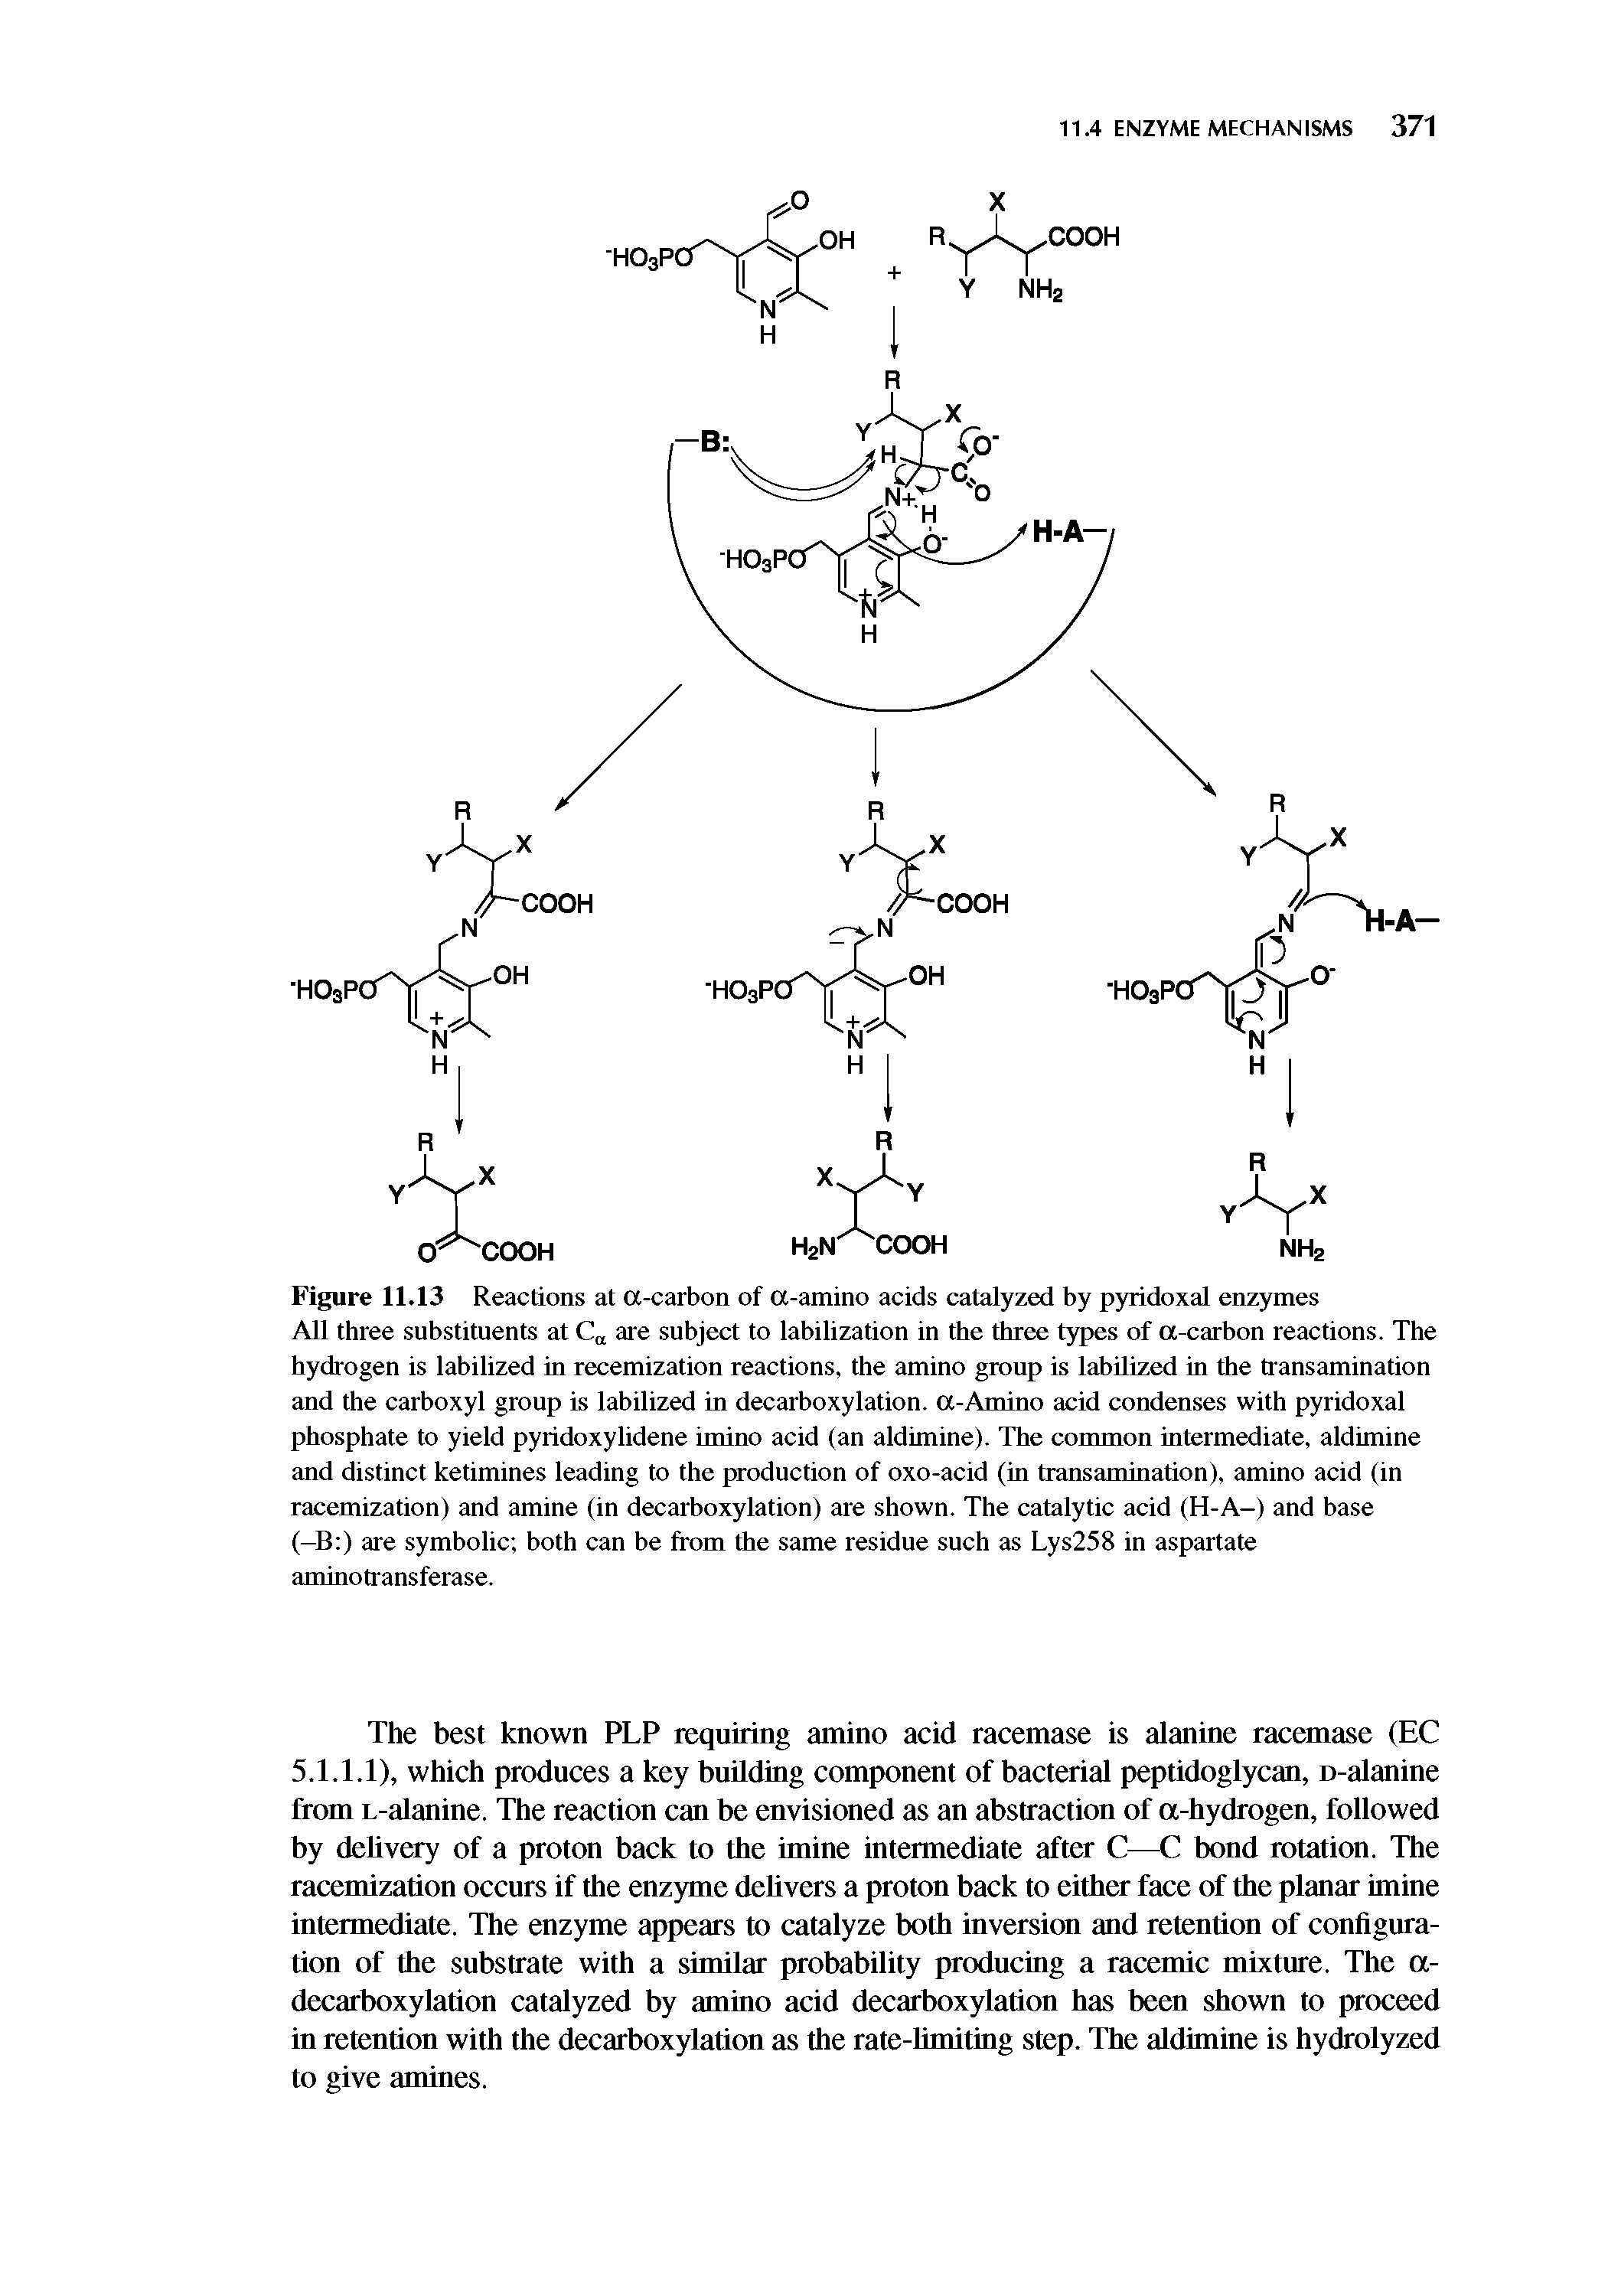 Figure 11.13 Reactions at a-carbon of a-amino acids catalyzed by pyridoxal enzymes All three substituents at C are subject to labilization in the three types of a-carbon reactions. The hydrogen is labilized in recemization reactions, the amino group is labUized in the transamination and the carboxyl group is labilized in decarboxylation. a-Amino acid condenses with pyridoxal phosphate to yield pyridoxylidene imino acid (an aldimine). The common intermediate, aldimine and distinct ketimines leading to the production of oxo-acid (in transamination), amino acid (in racemization) and amine (in decarboxylation) are shown. The catalytic acid (H-A-) and base (-B ) are symbolic both can be from the same residue such as Lys258 in aspartate aminotransferase.